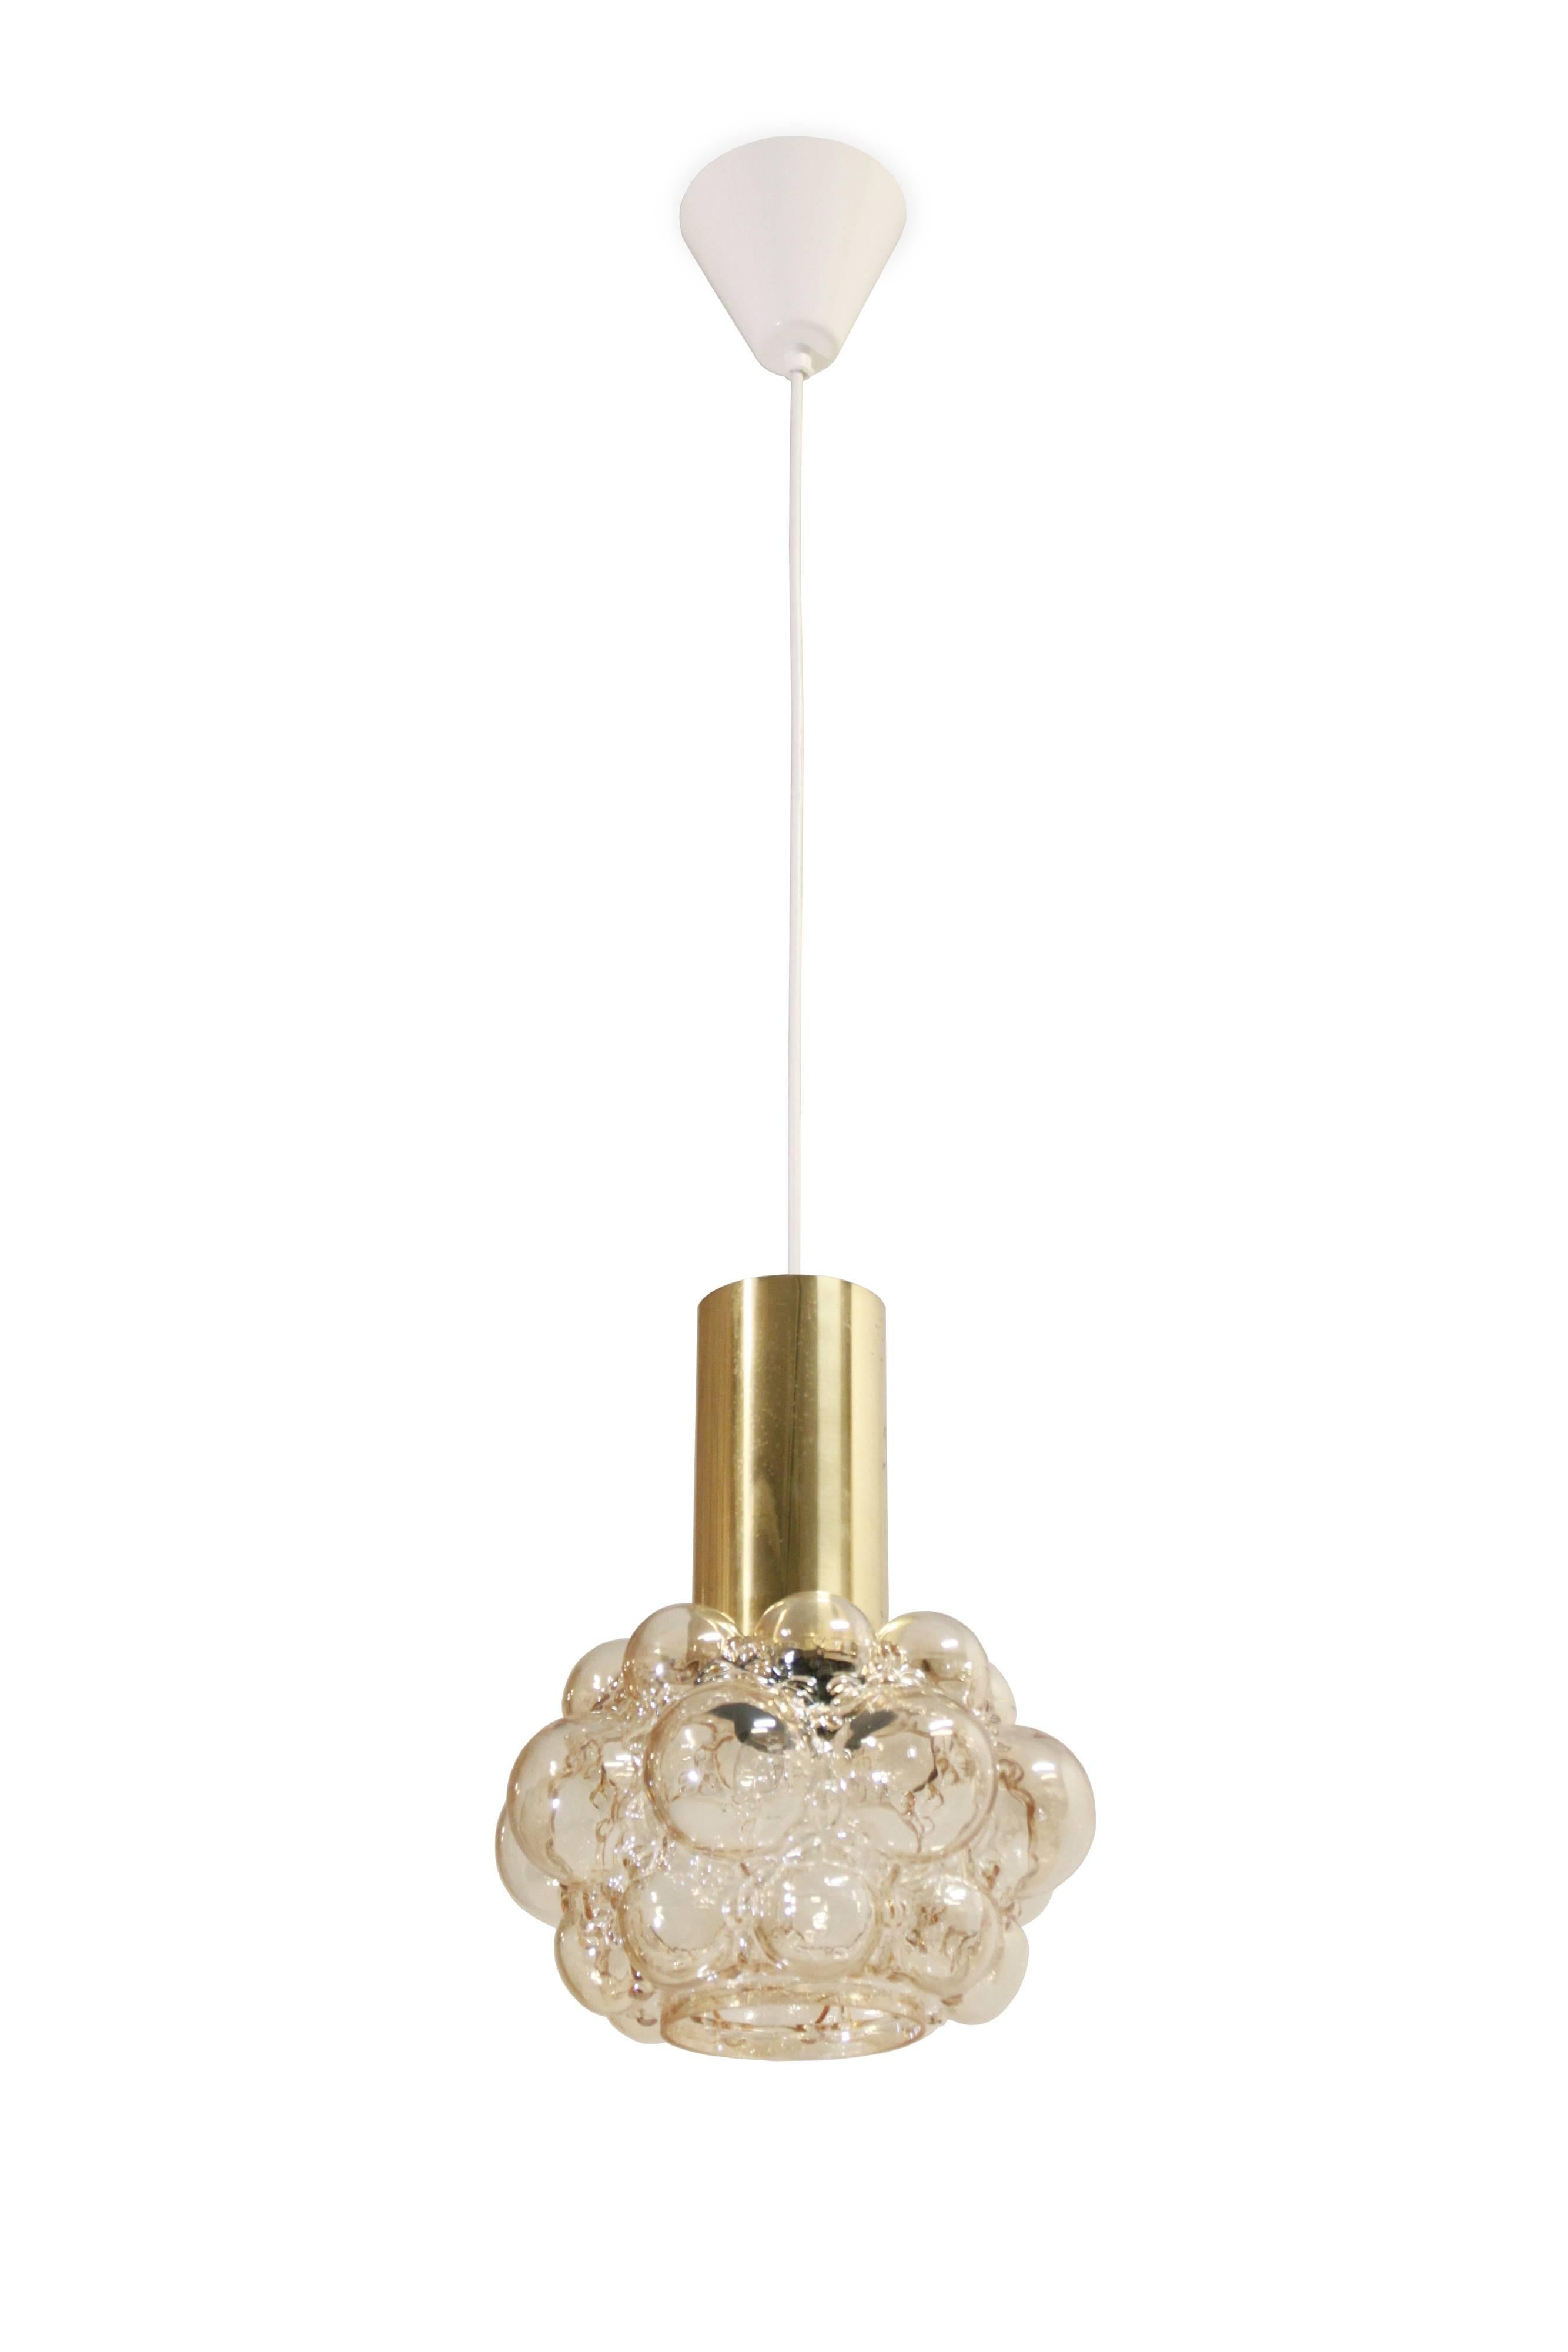 Decorative ceiling lamp in brass and handblown glass. Designed by Helena Tynell for Limburg, Germany from 1970s second half. The lamp is fully working and in good vintage condition.